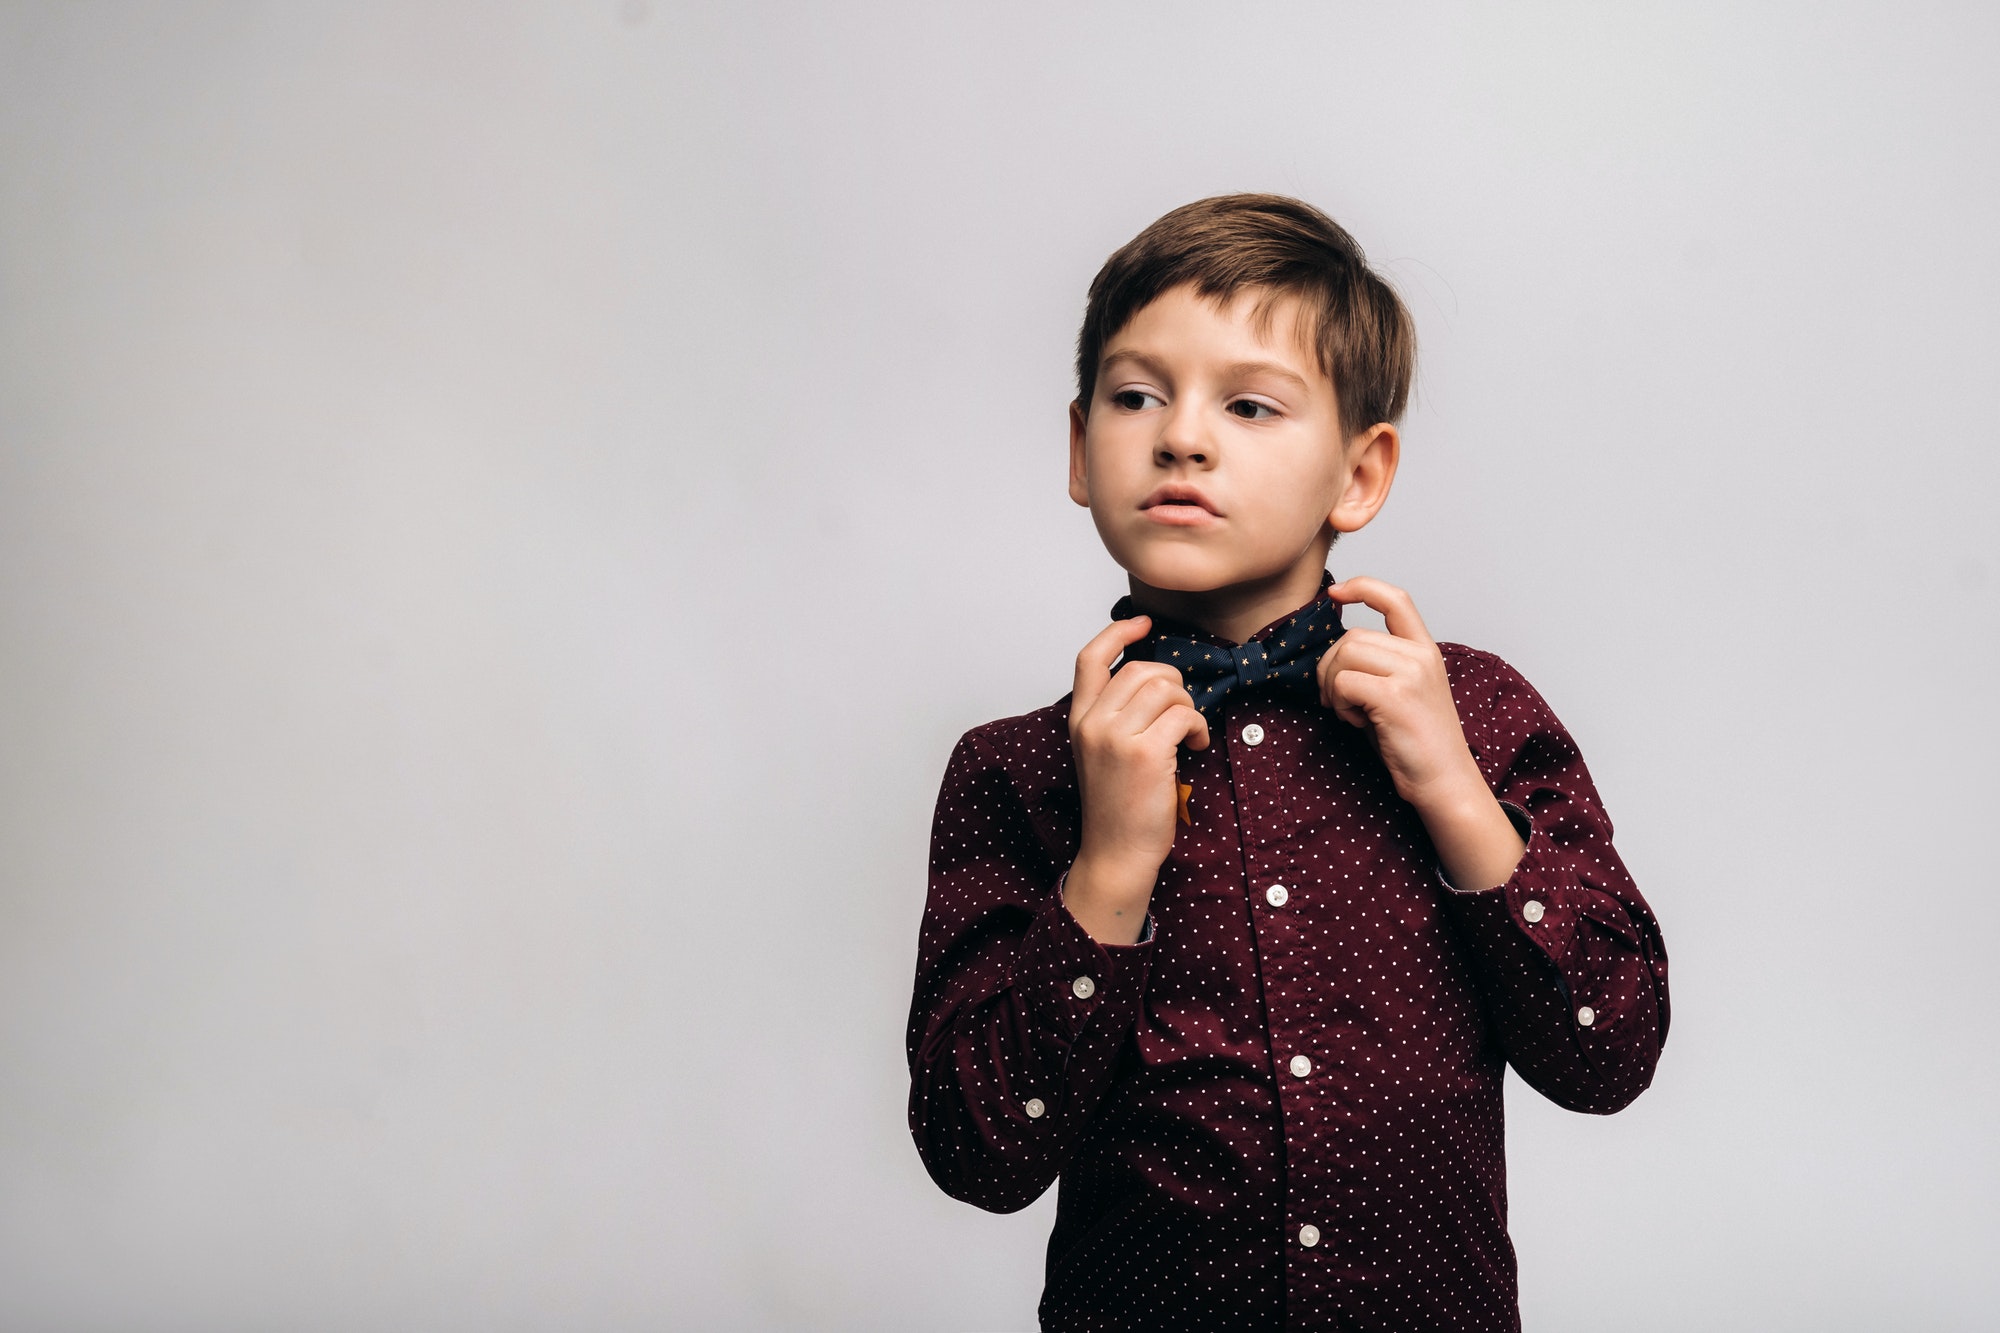 a beautiful boy in a shirt and bow tie stands on a gray background.jpg